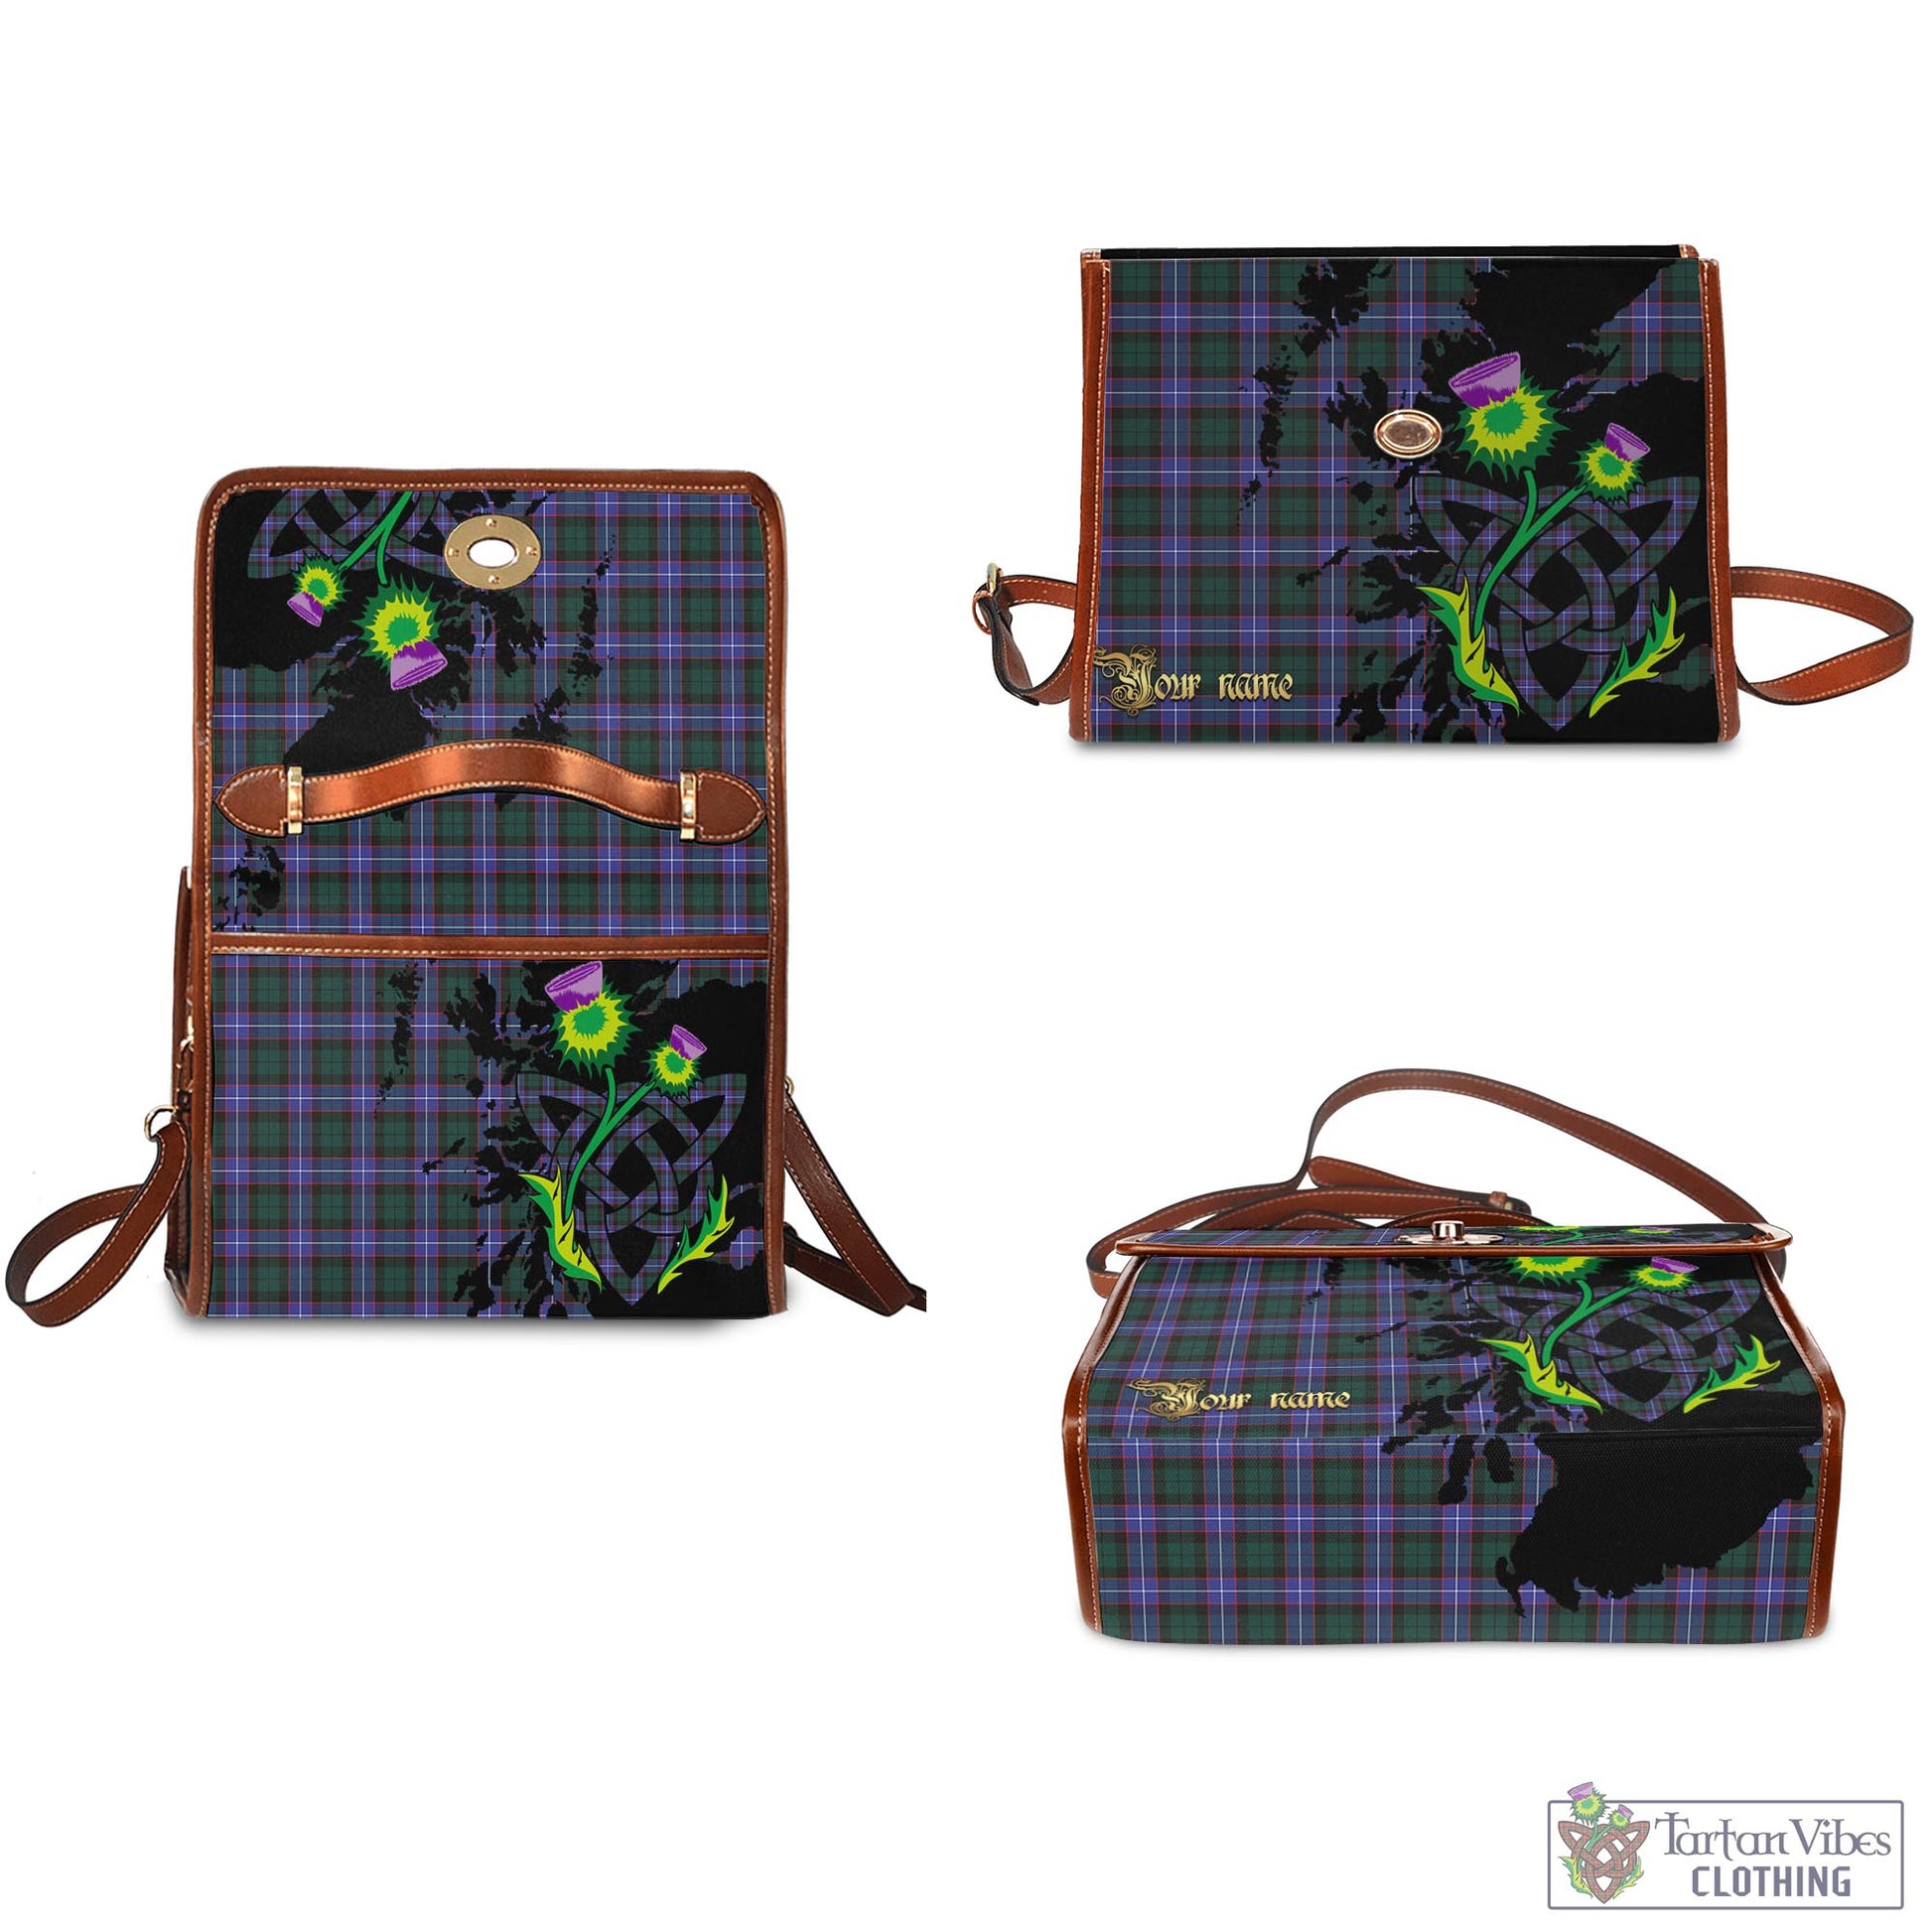 Tartan Vibes Clothing Hunter Modern Tartan Waterproof Canvas Bag with Scotland Map and Thistle Celtic Accents